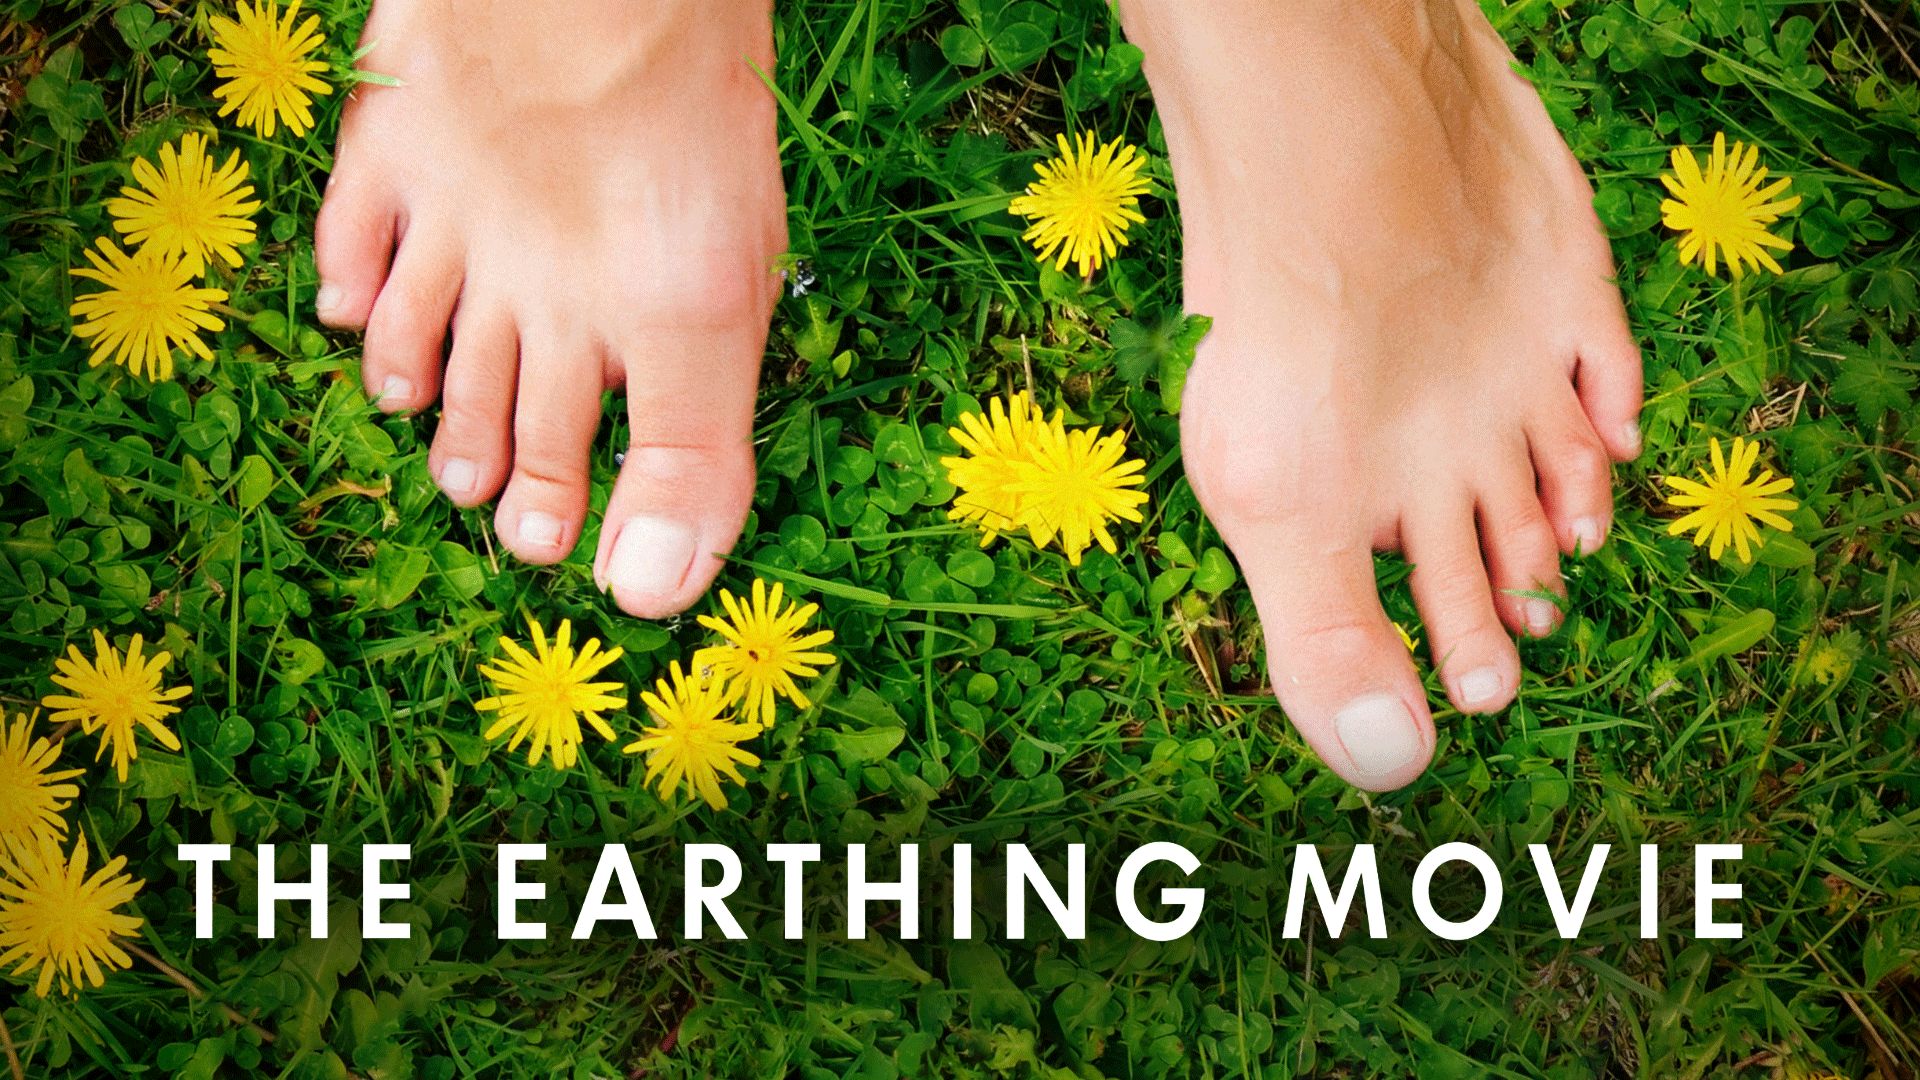 The Earthing Movie